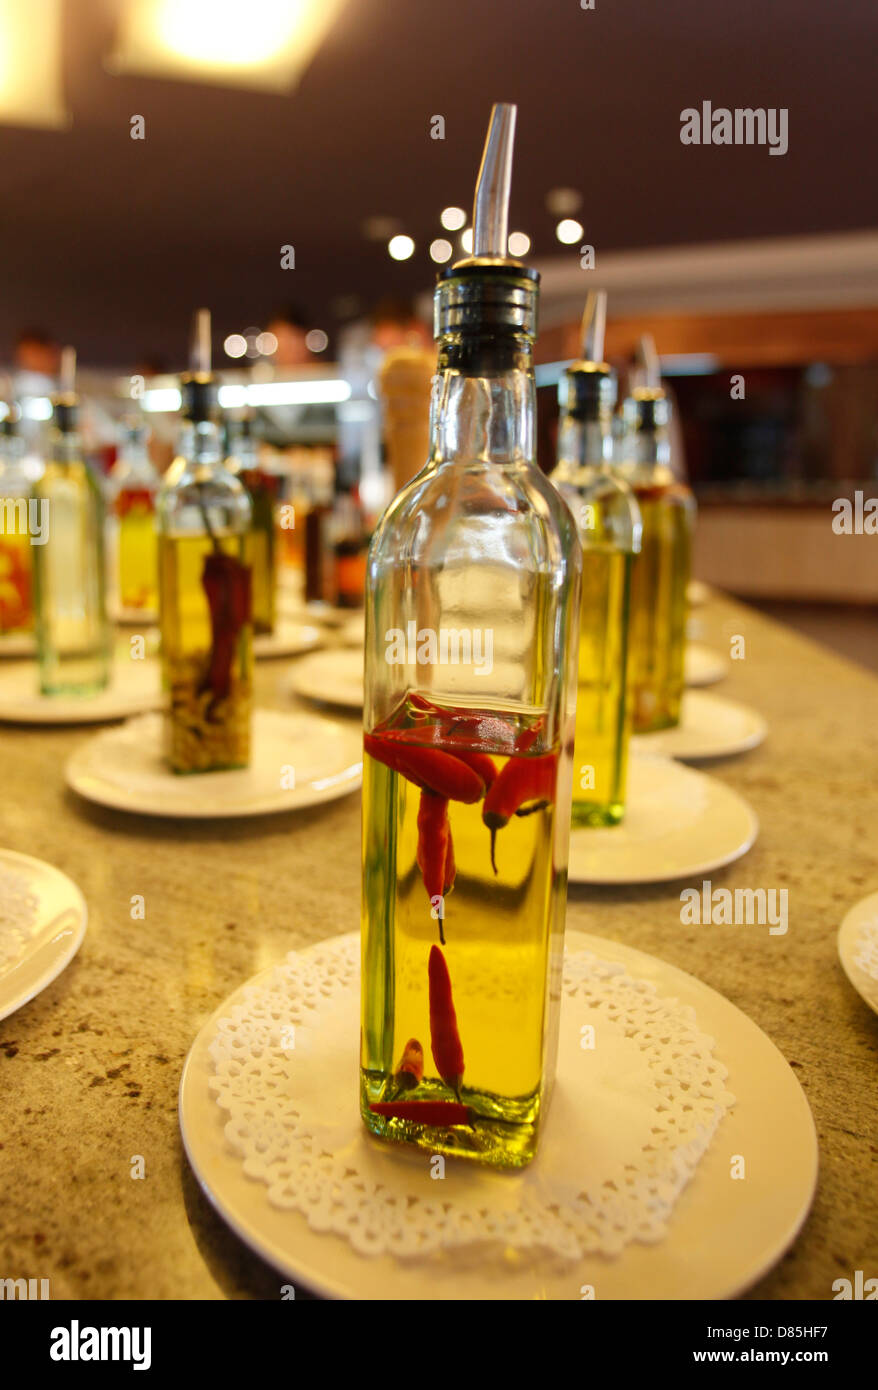 Selection of olive oil bottles in a restaurant. Stock Photo